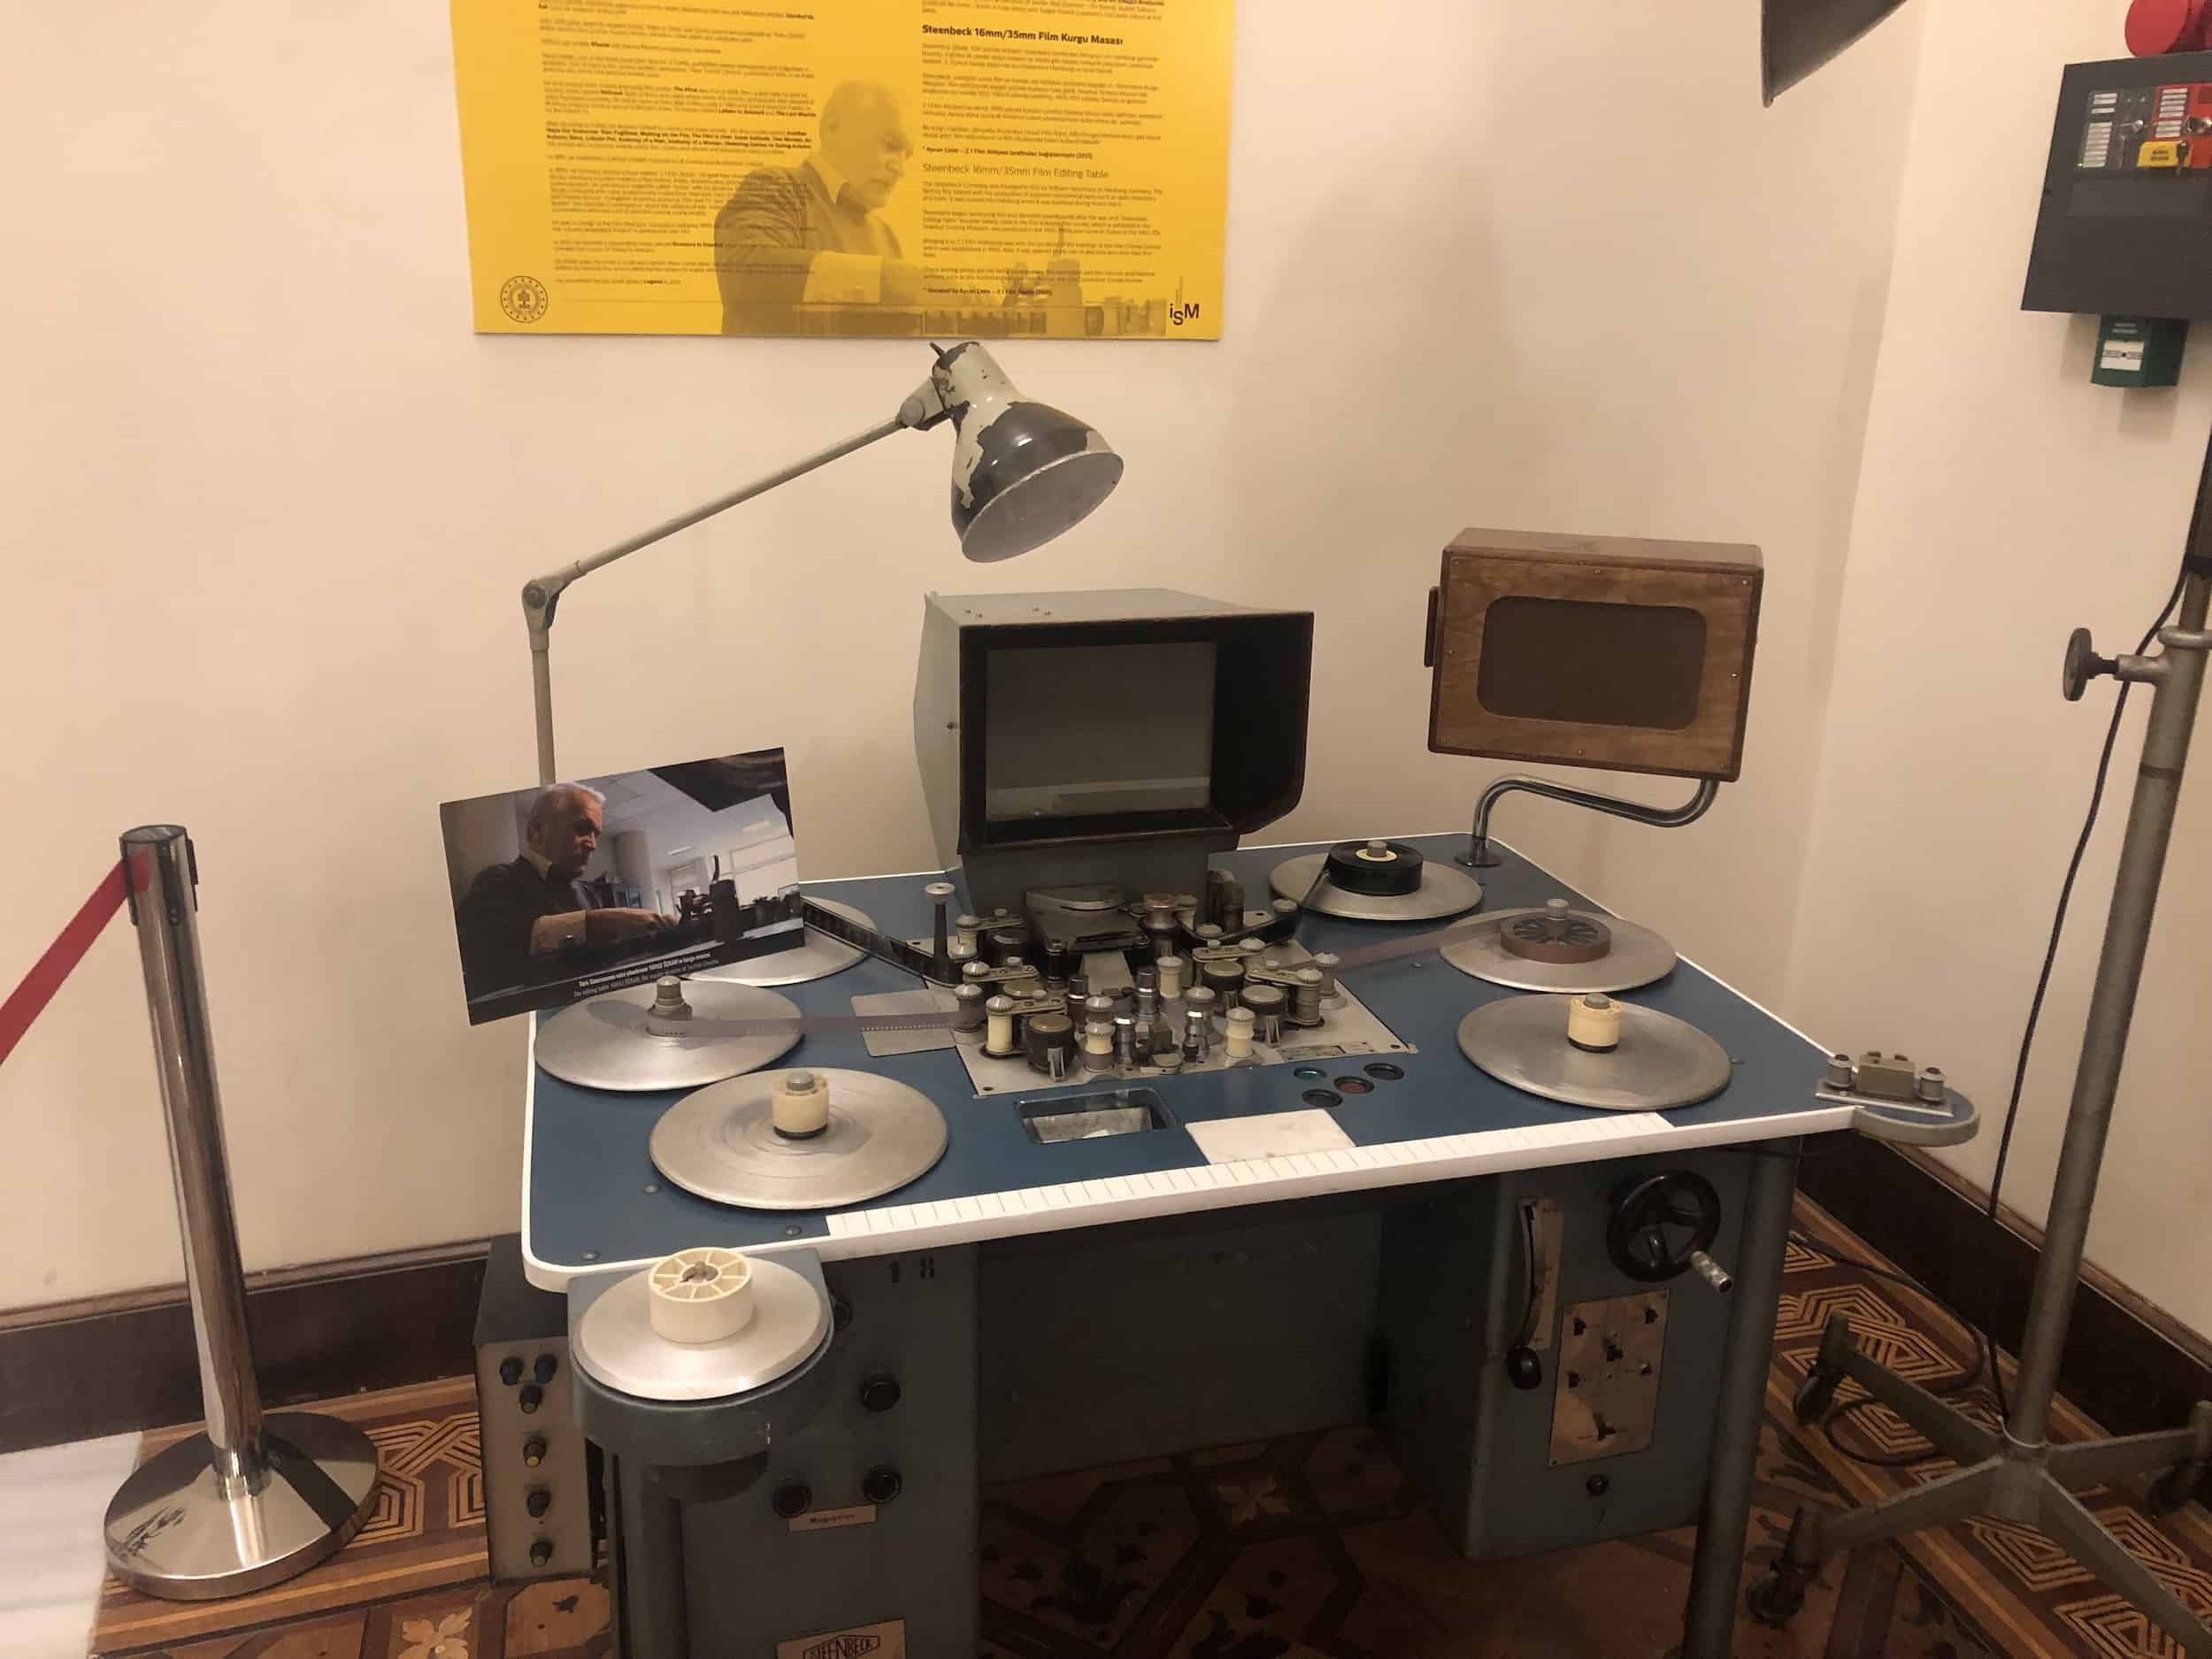 Steenbeck 16mm/35mm flatbed film editing table at the Istanbul Cinema Museum in Istanbul, Turkey